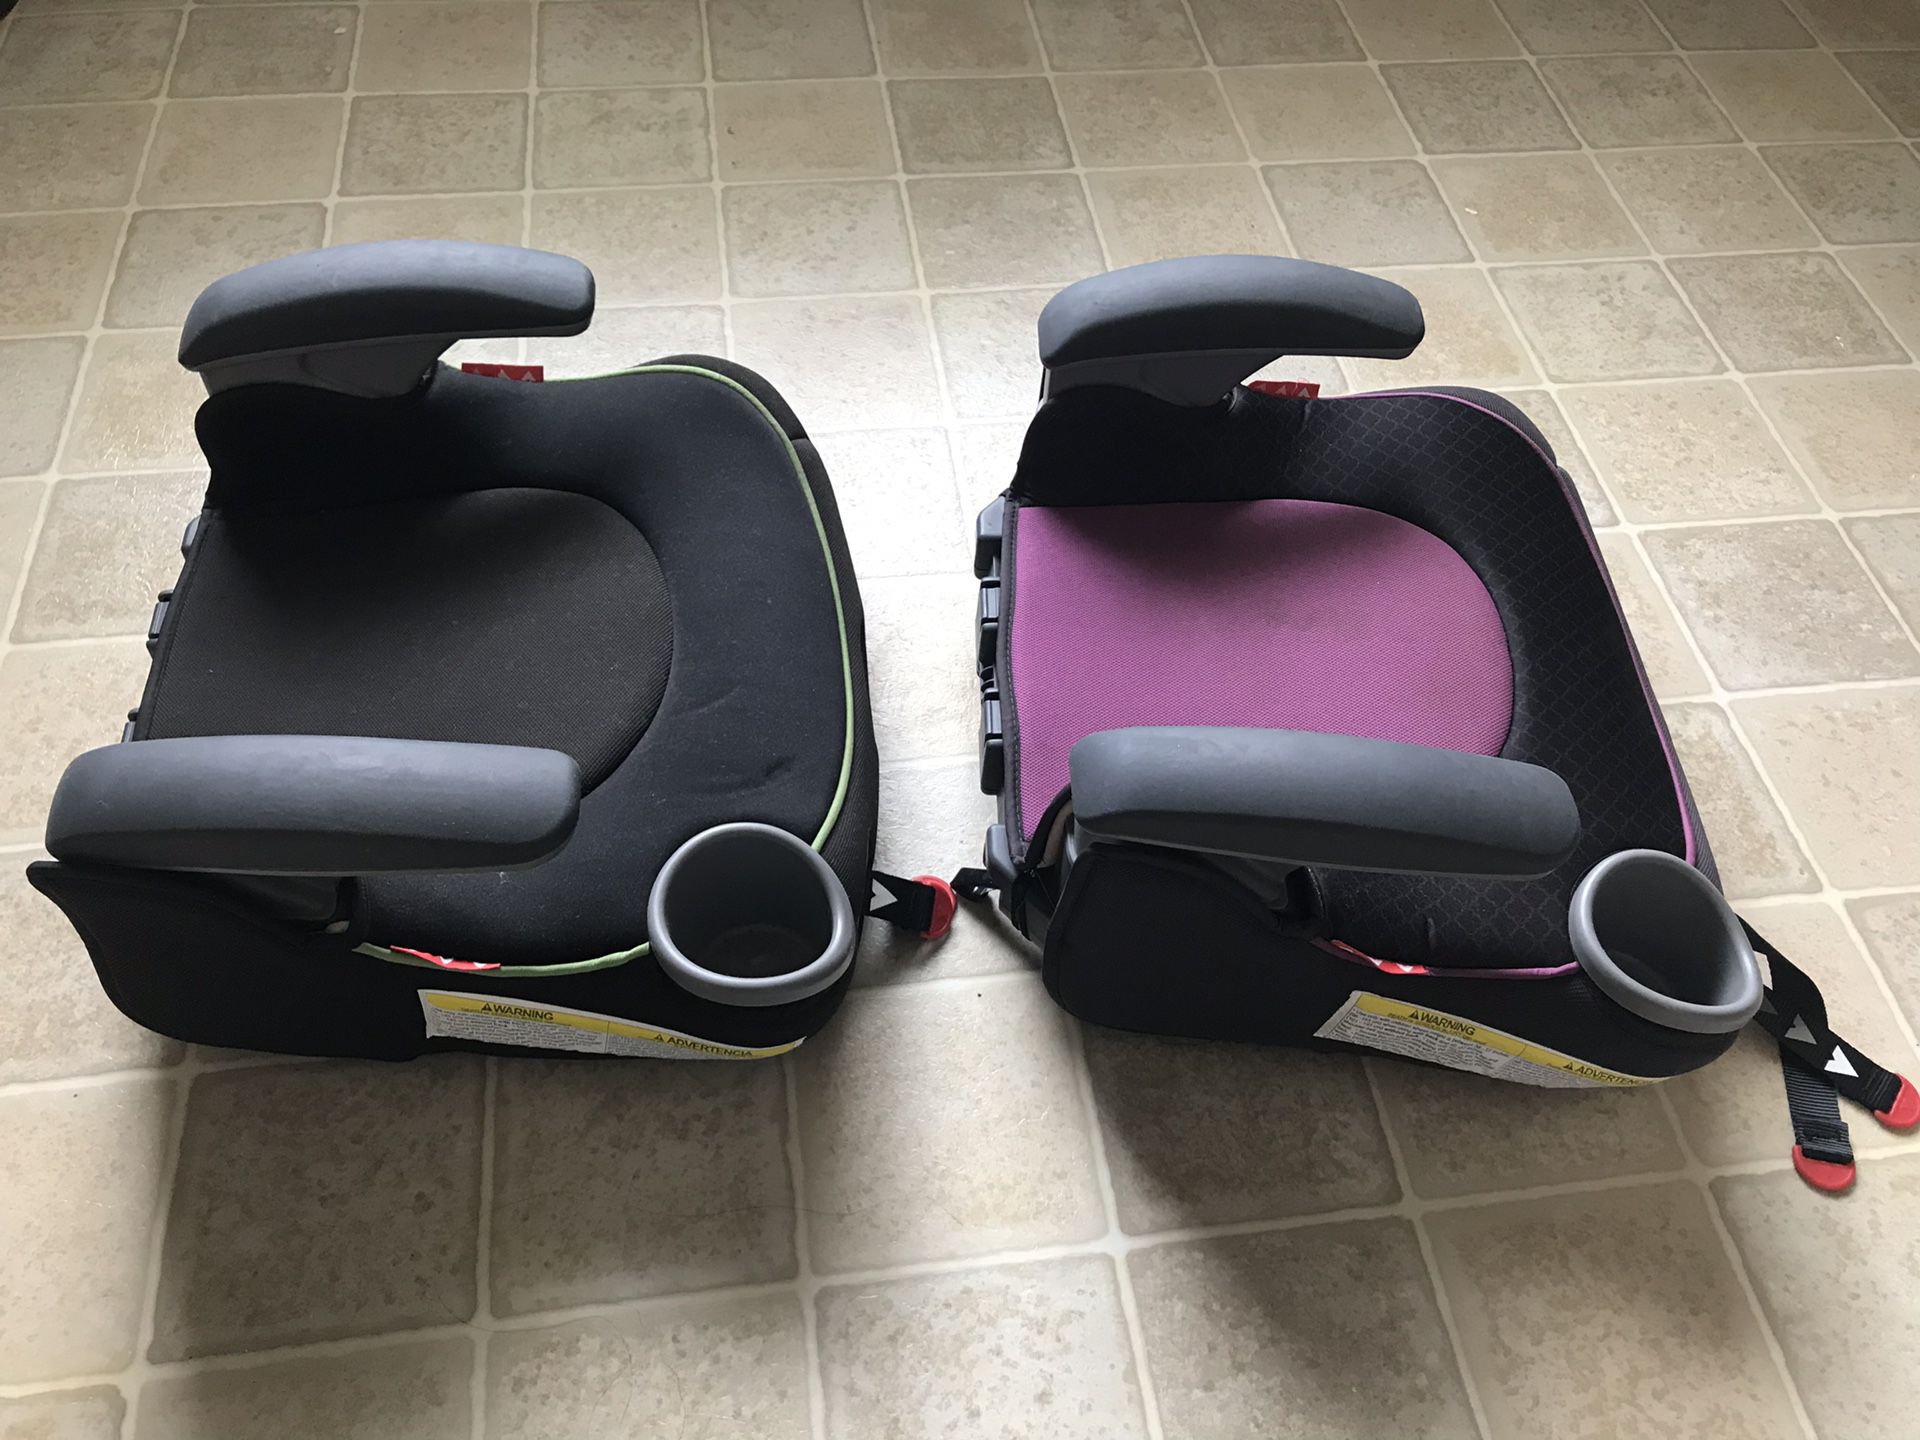 Graco Booster Seat. $25 each.